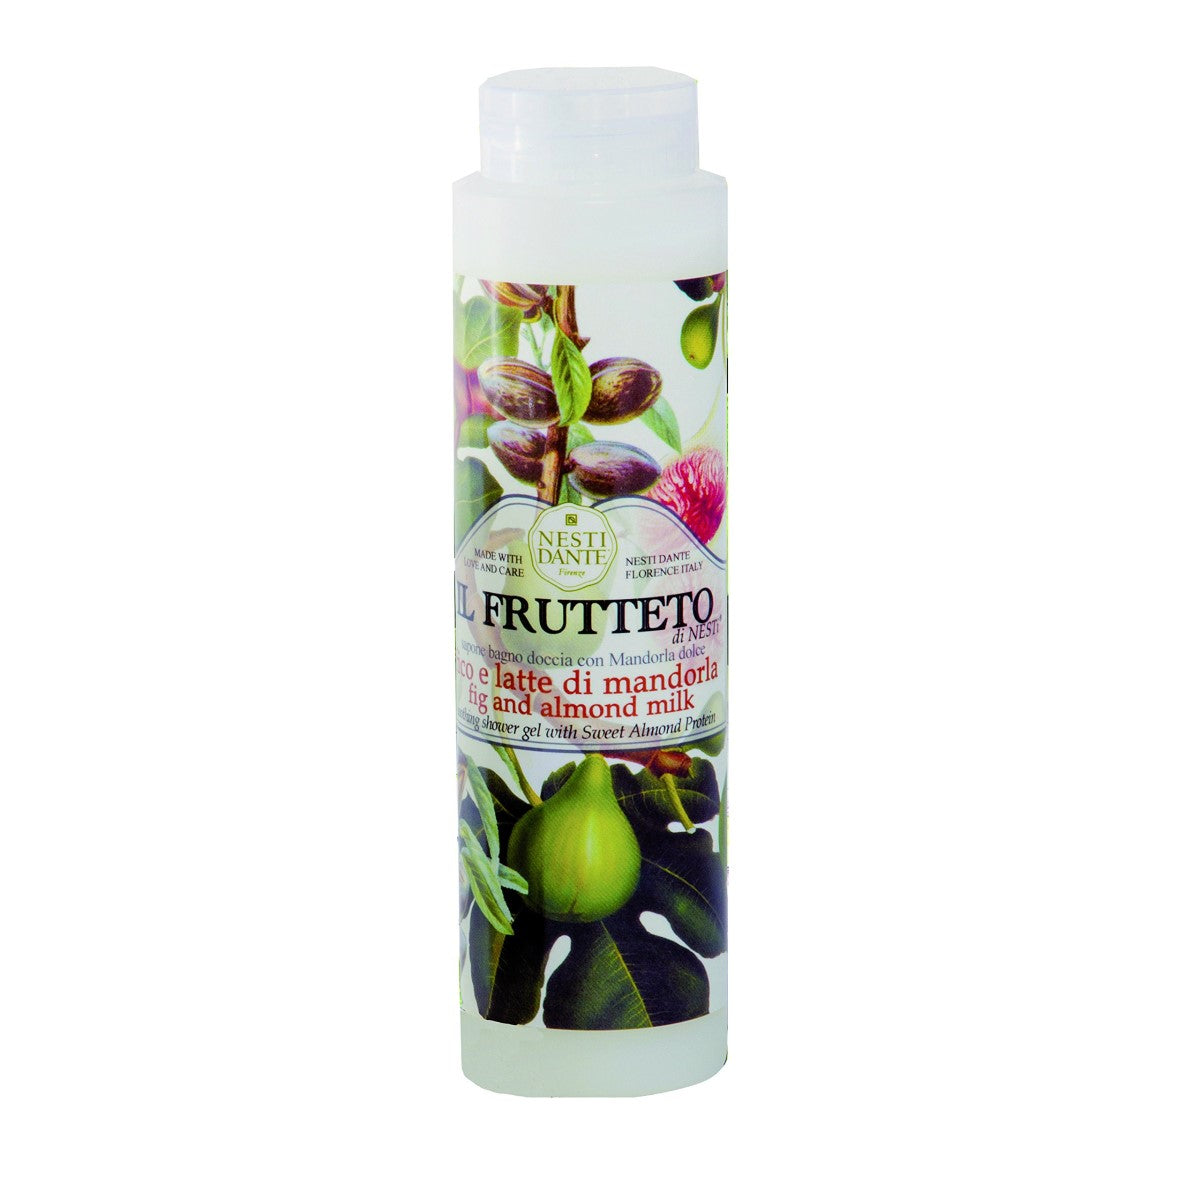 Primary Image of Il Frutteto Fig and Almond Milk Bath and Shower Gel